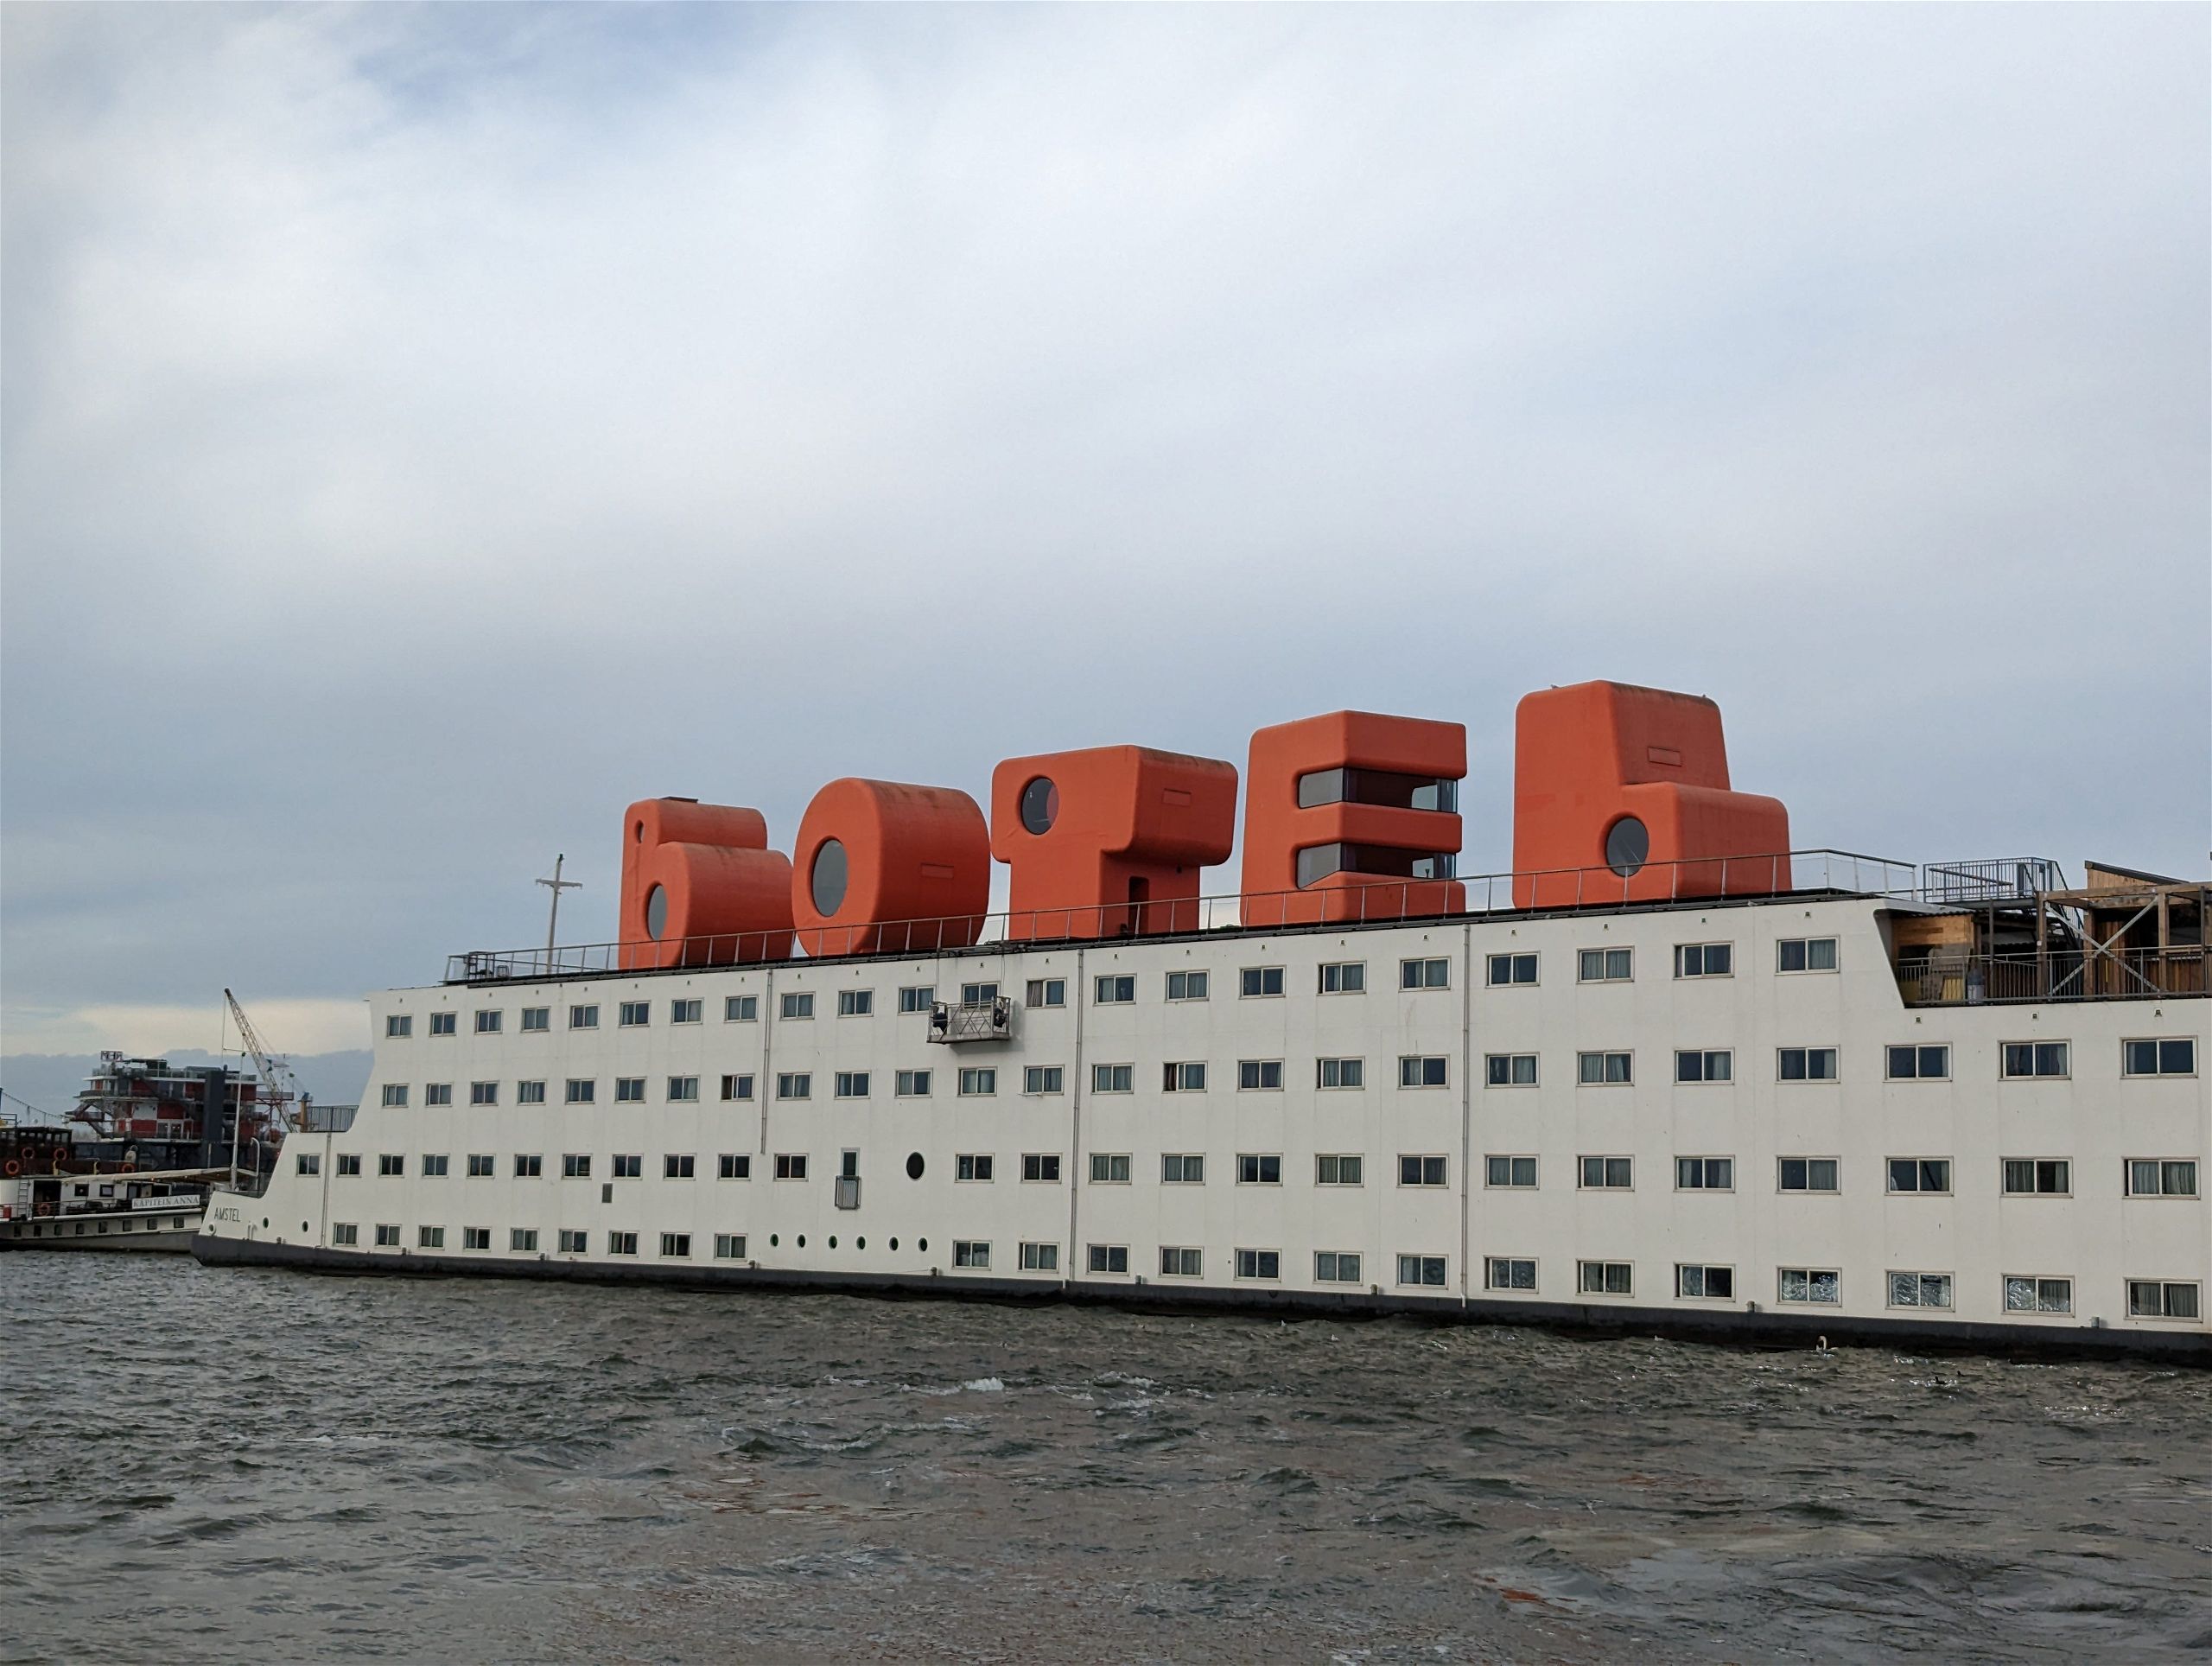 A boat with the word "Botel" on top